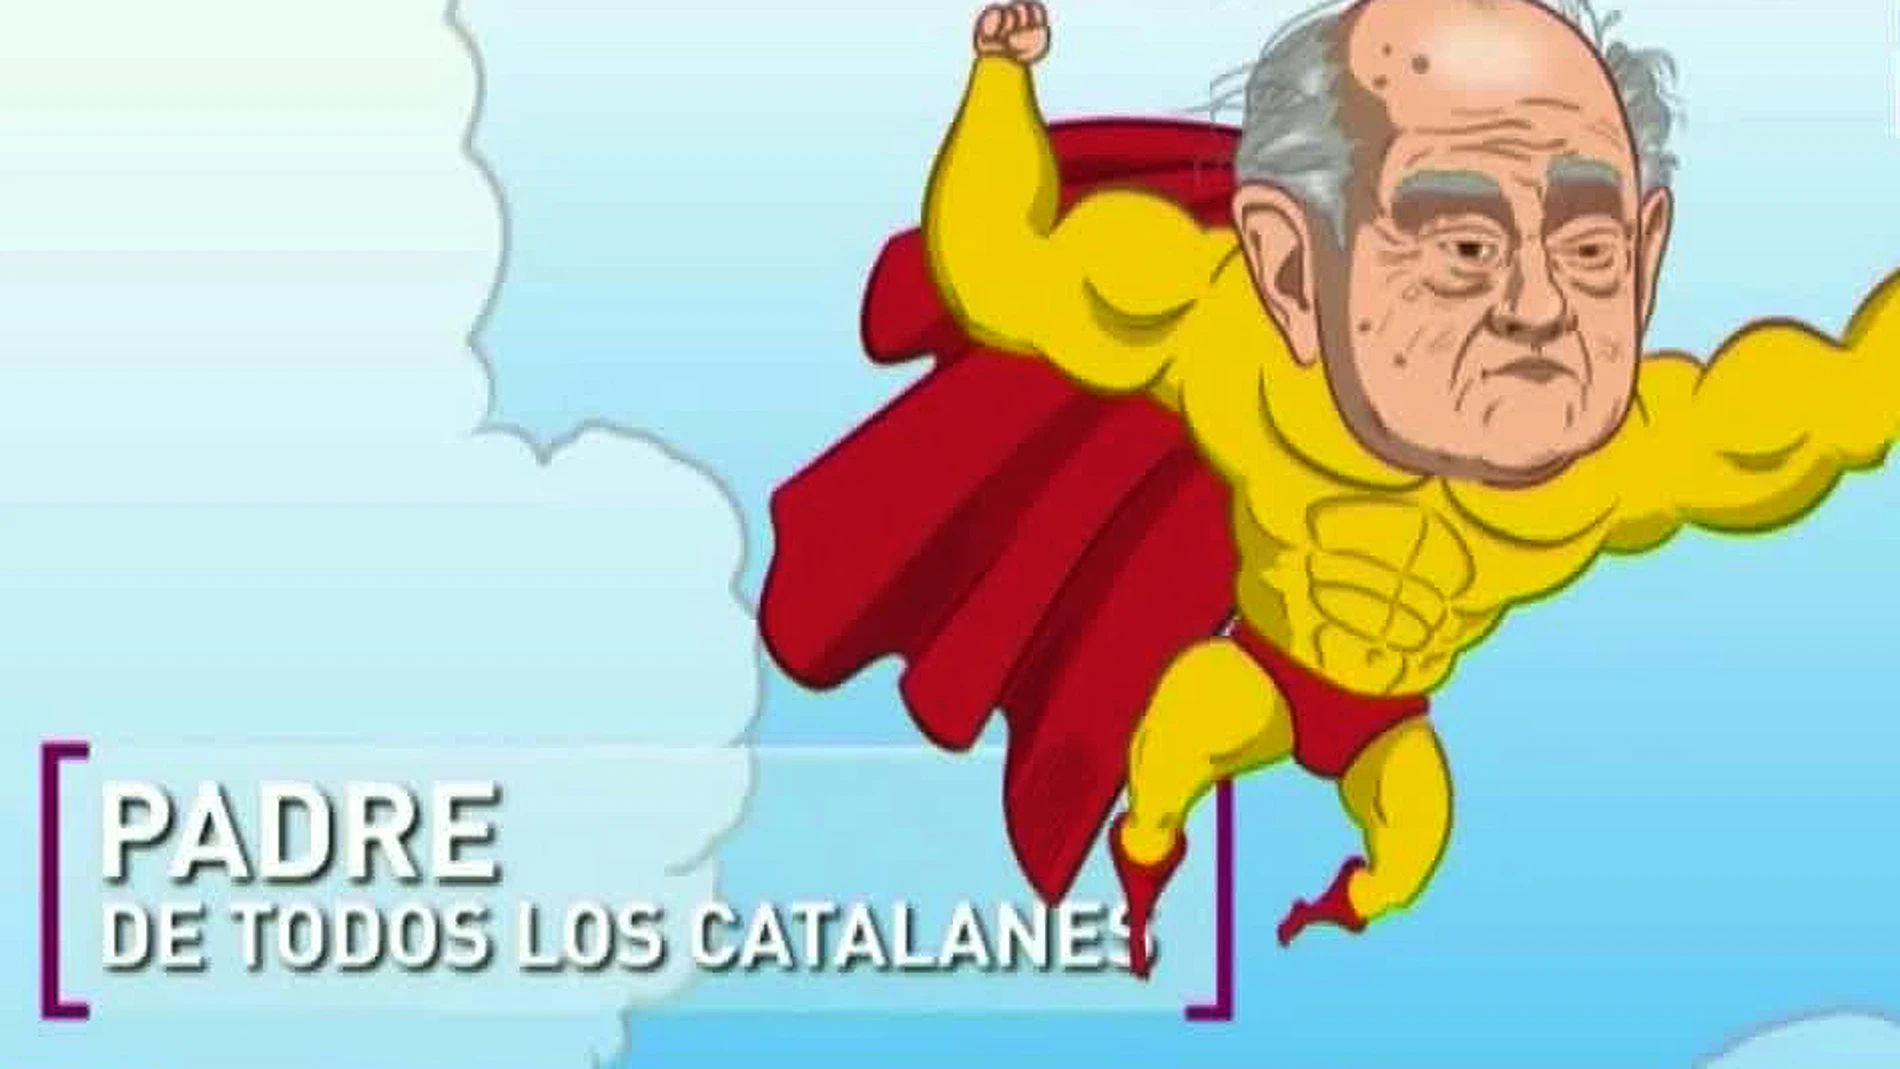 Catalonia is not Pujol